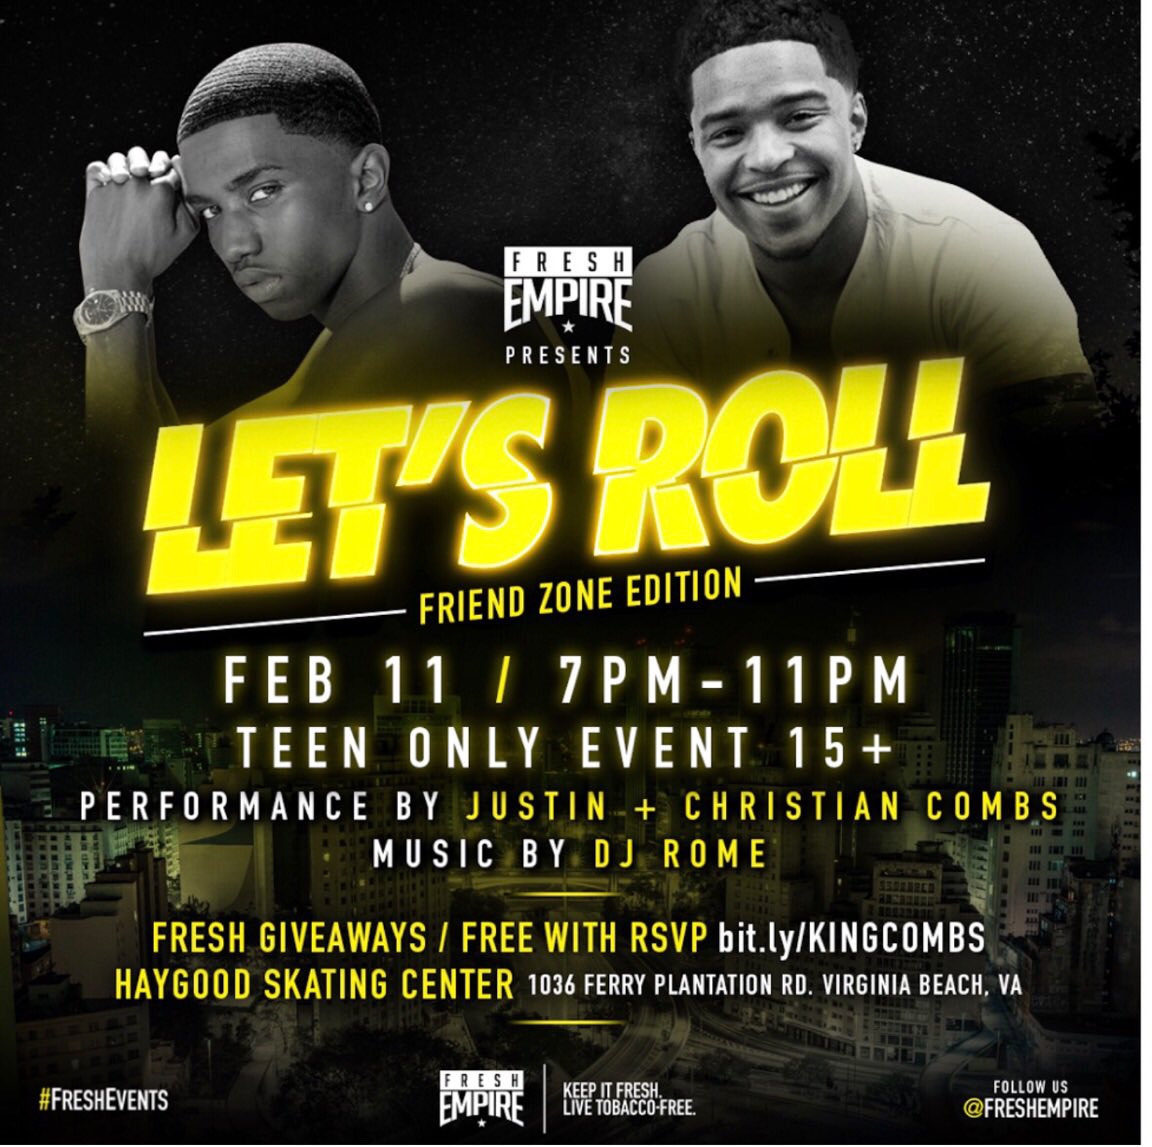 Virginia Beach!!! My sons @JDior_ and @Kingcombs are in your city TONIGHT!!! Let's GO!! https://t.co/c4ZM36da7c